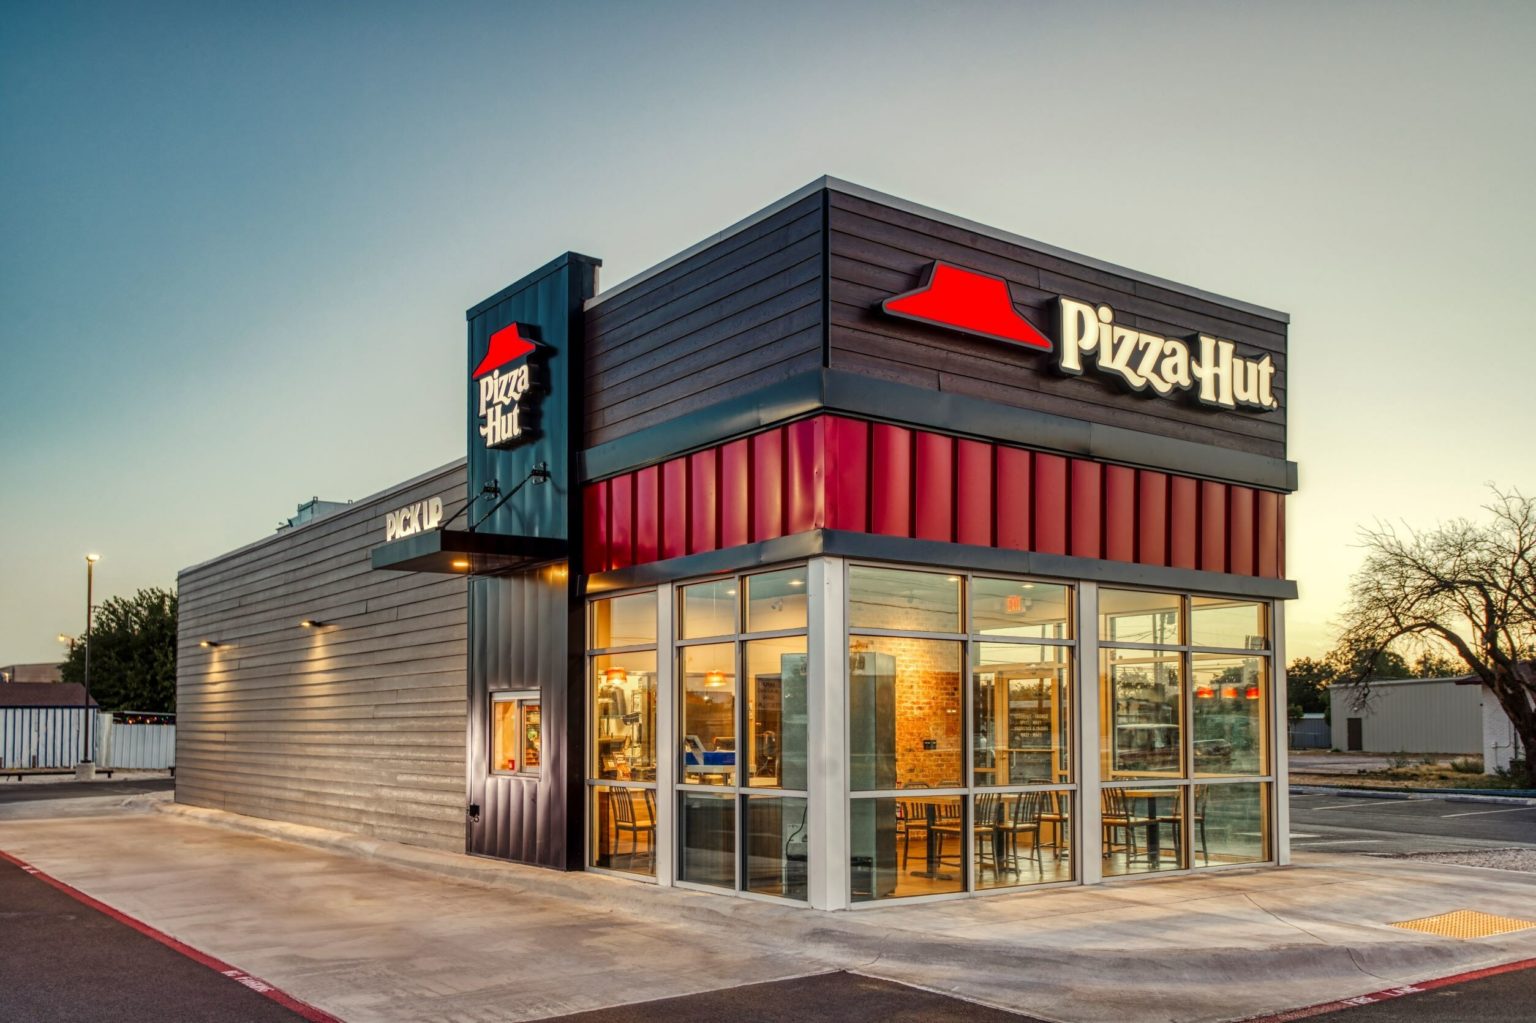 It's Back! Pizza Hut Announces the Return of 'The Big New Yorker,' An